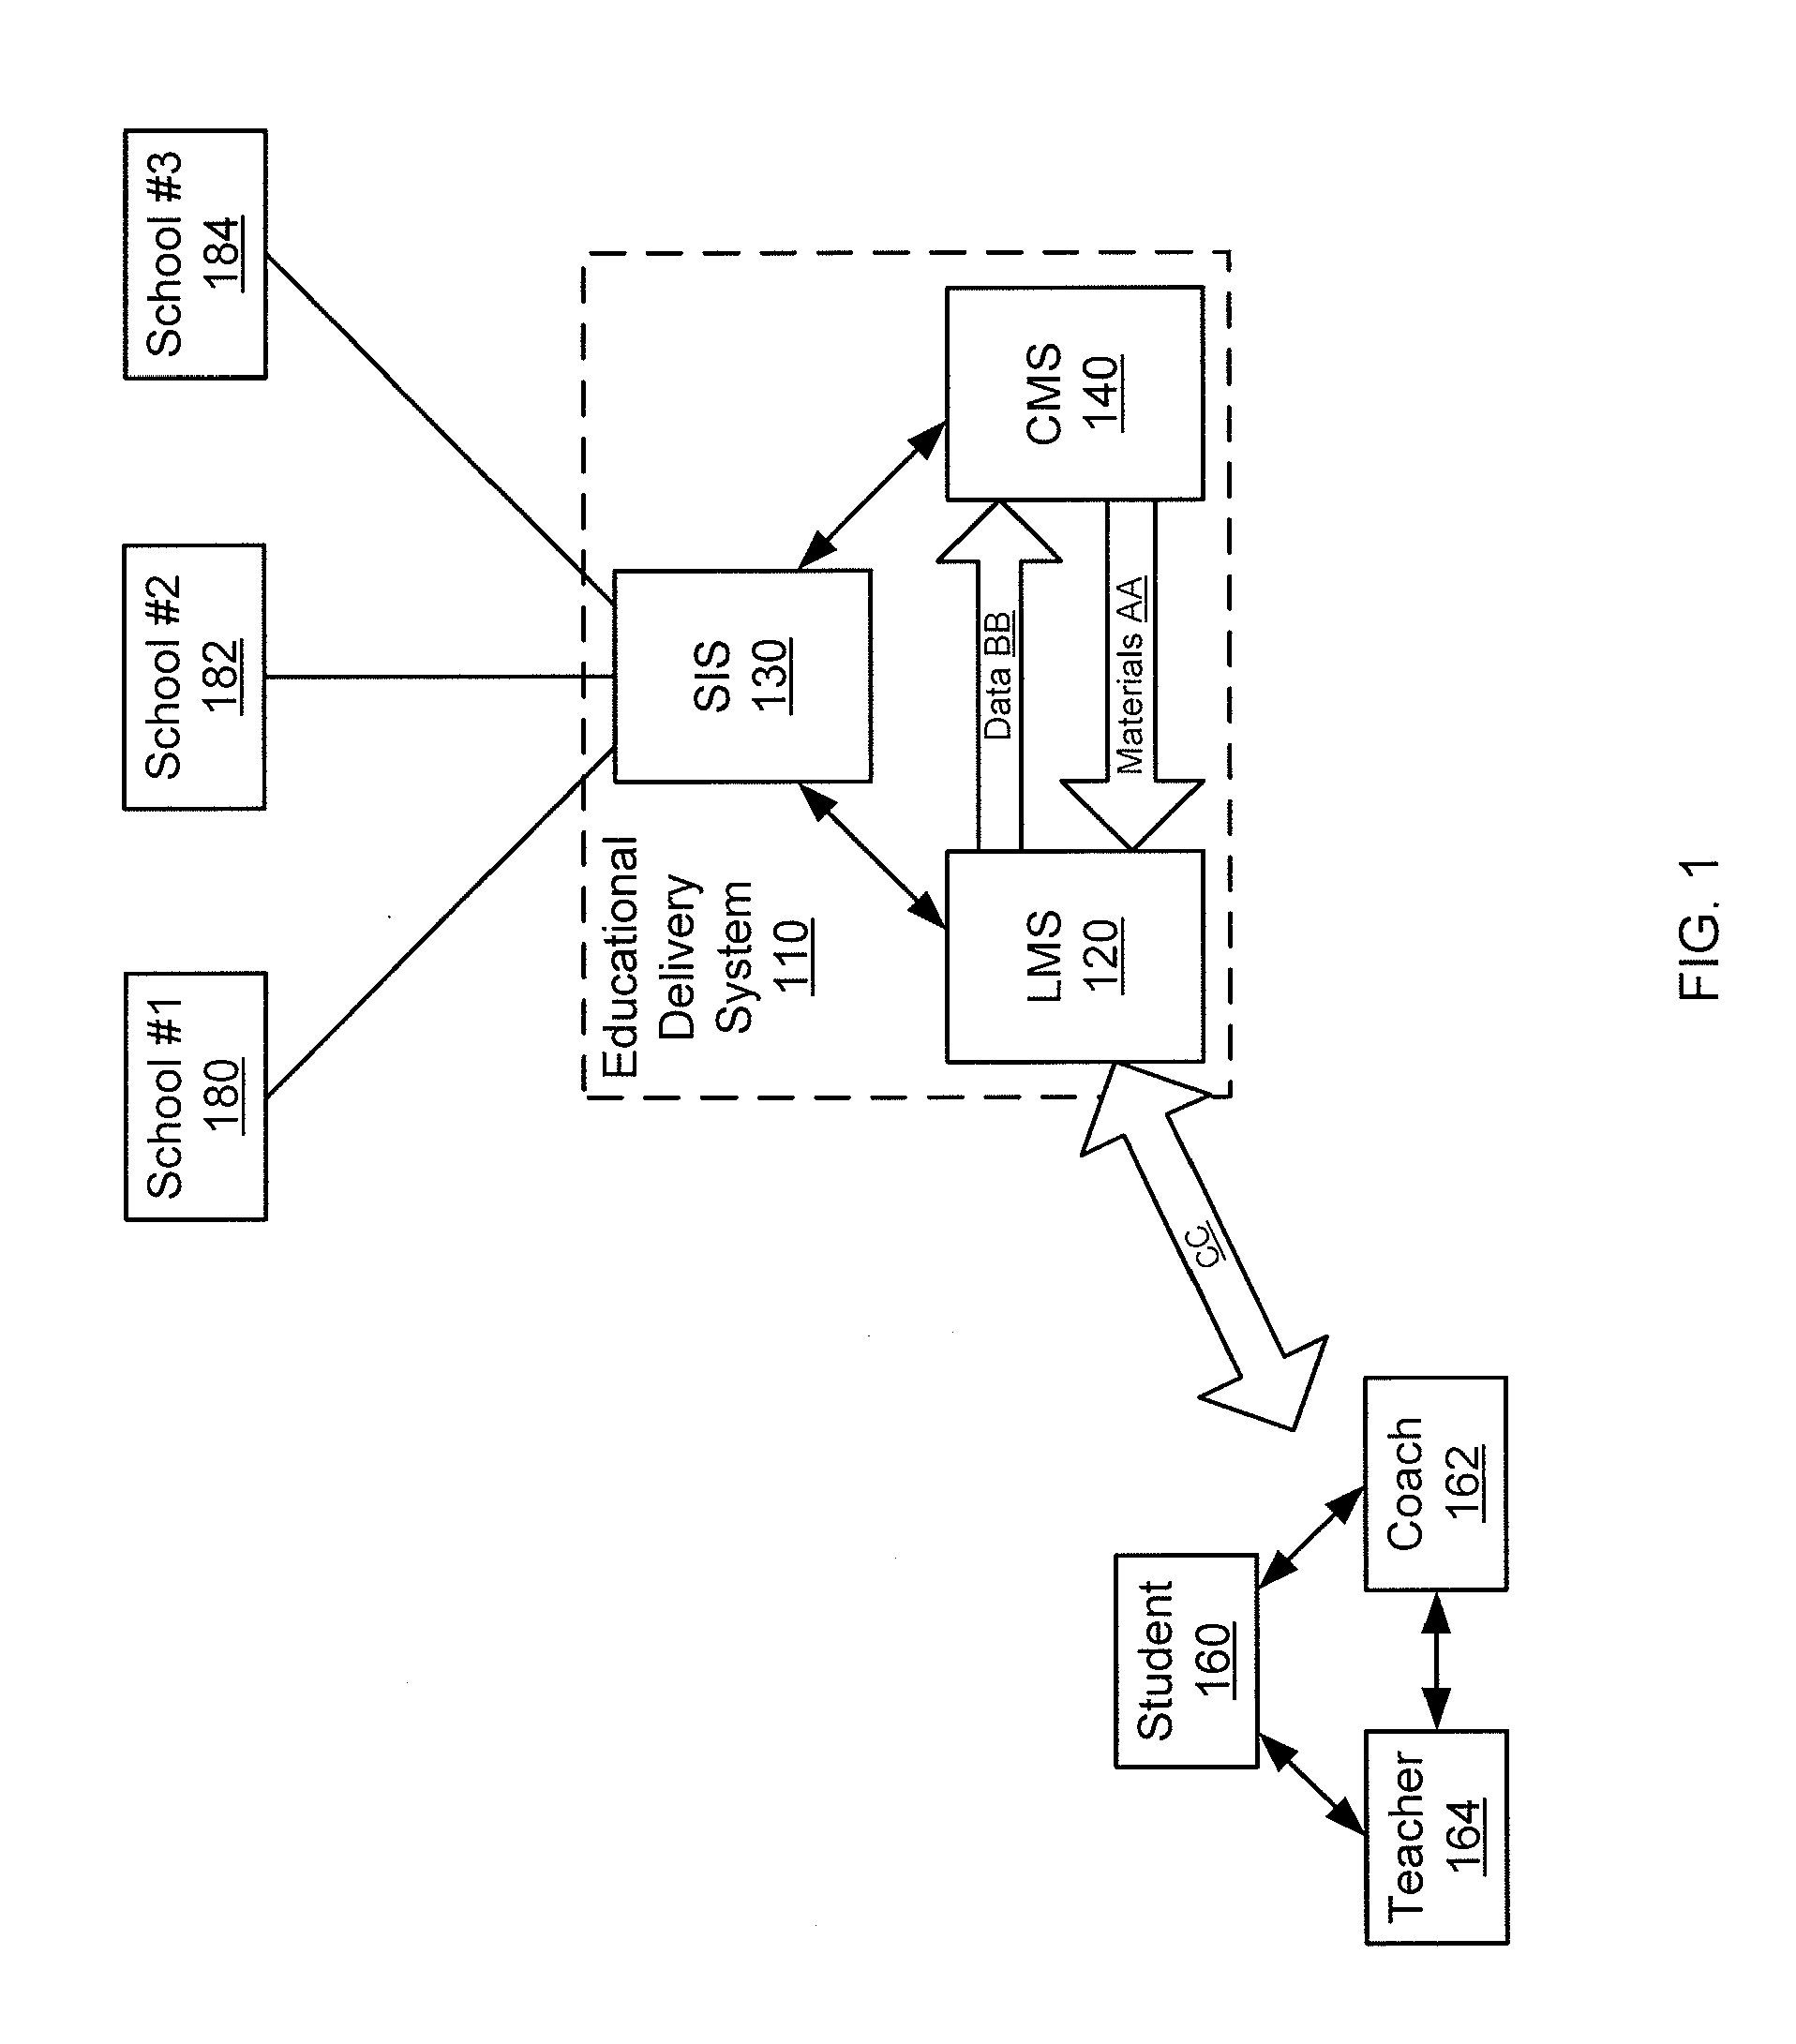 Systems and methods for producing, delivering and managing educational material